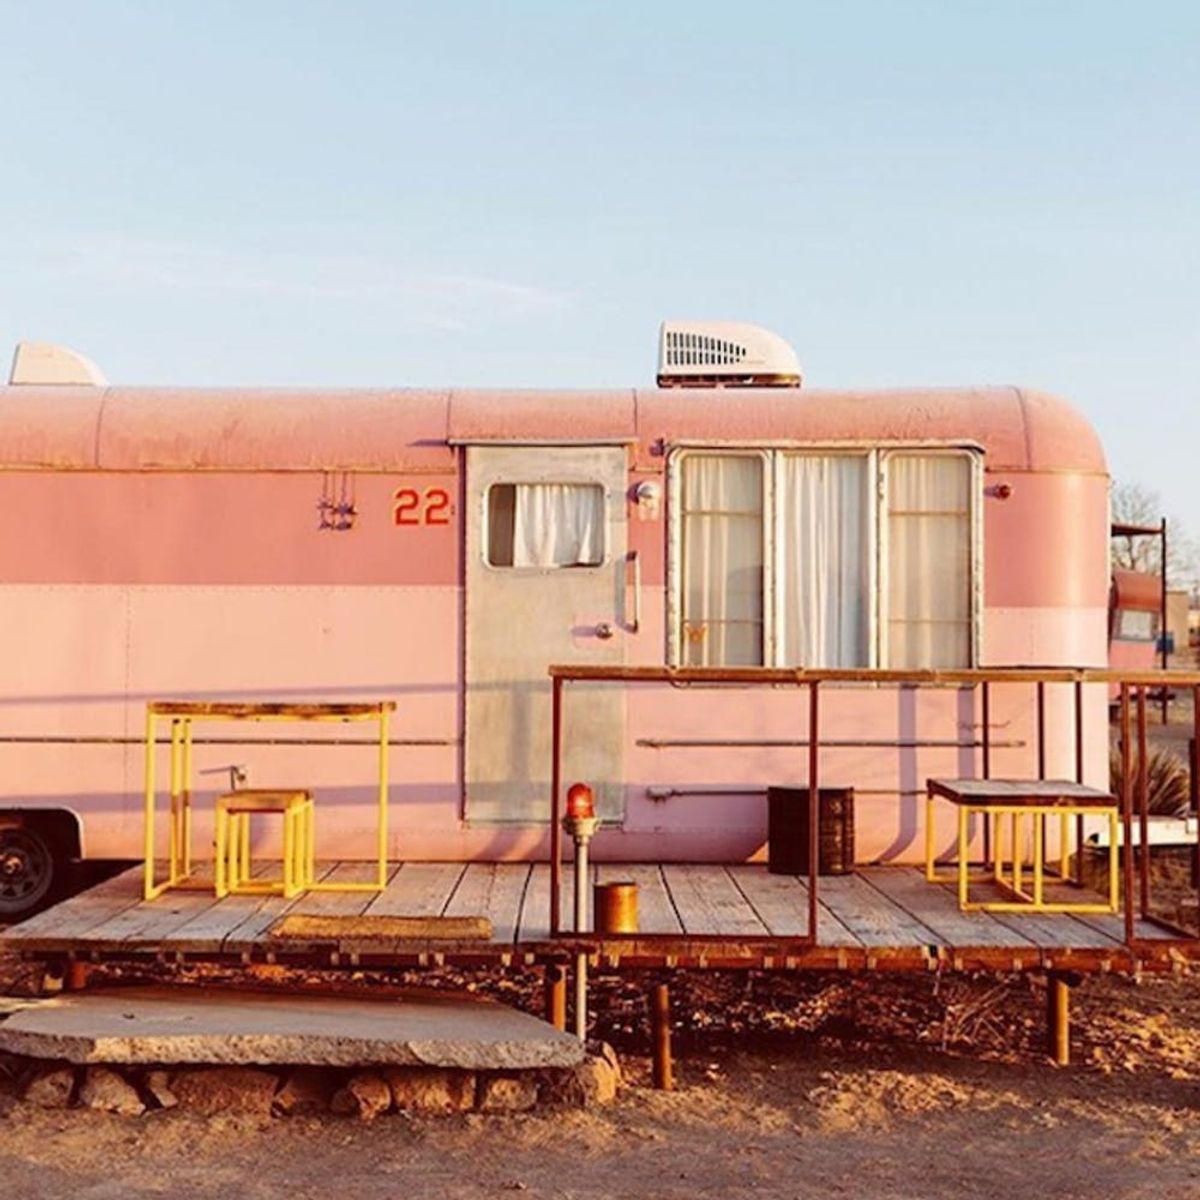 8 Beautiful and Bookable Desert Dwellings We Spotted on Instagram